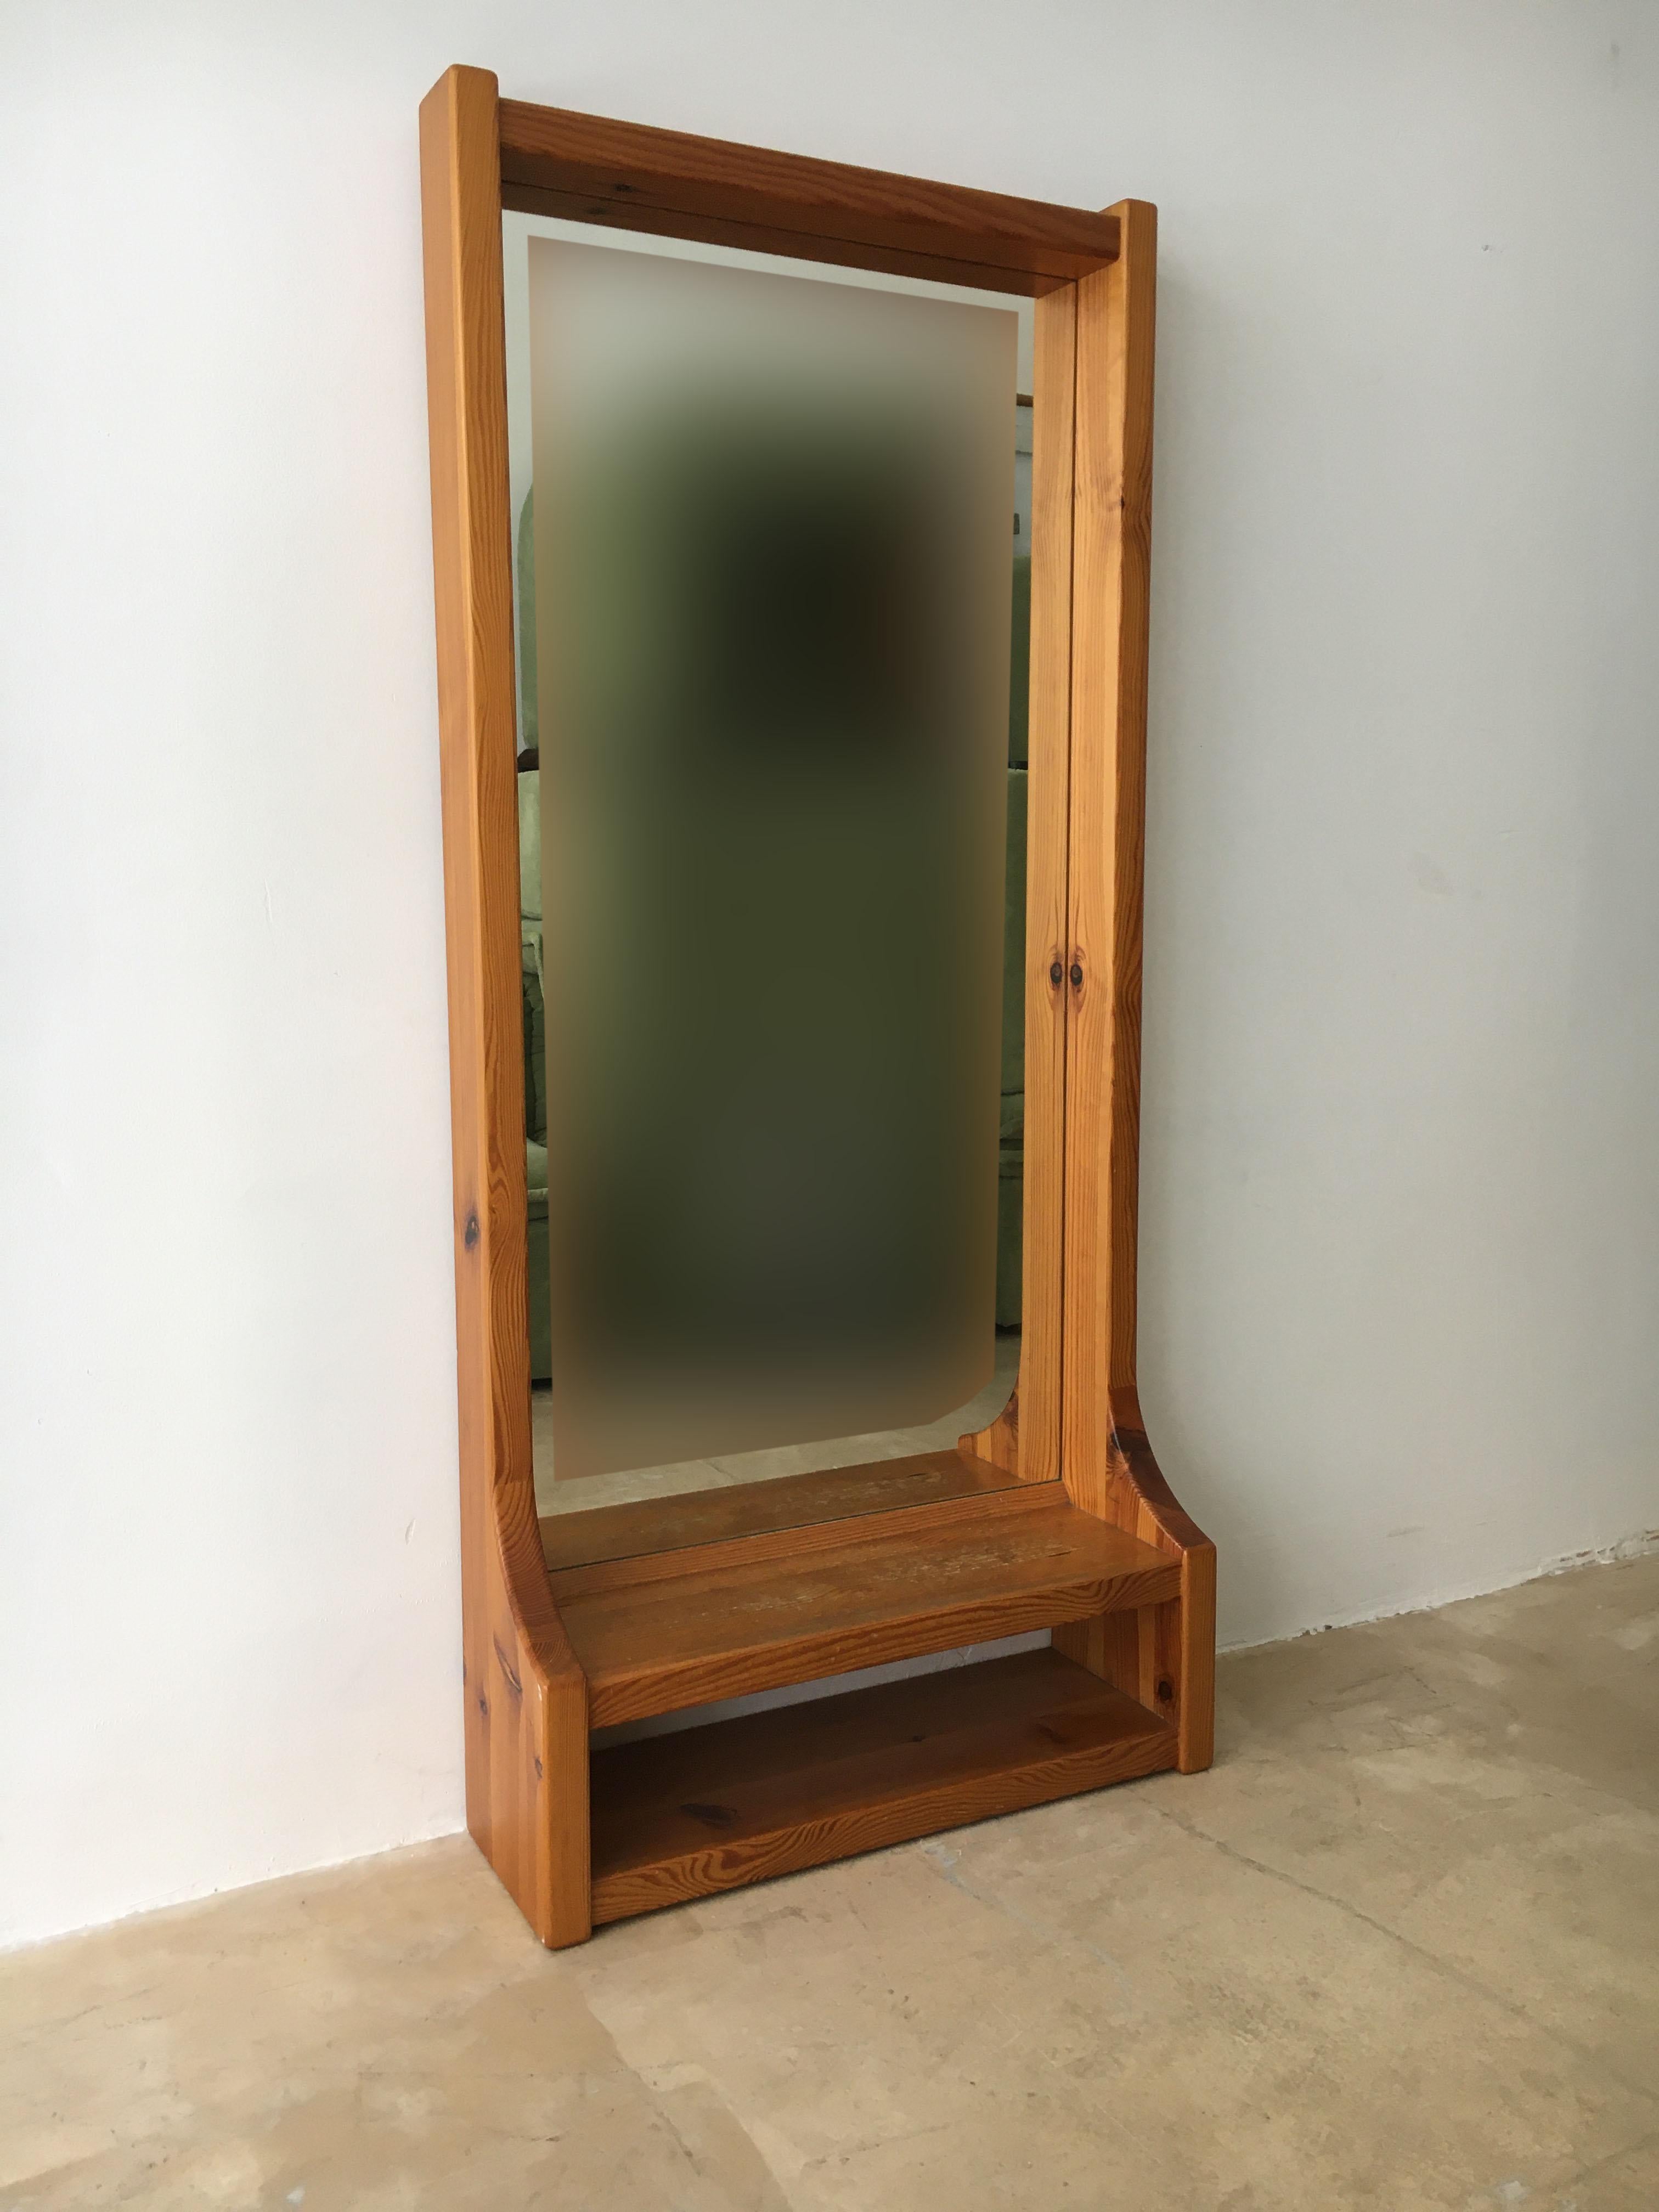 Modern floating wall mirror console by Glas Mäster in Markaryd, Sweden, 1970s. Crafted in solid pine, this floating wall mirror is as elegant as it is practical. The little shelf underneath the mirror is the perfect spot to leave keys, your phone or